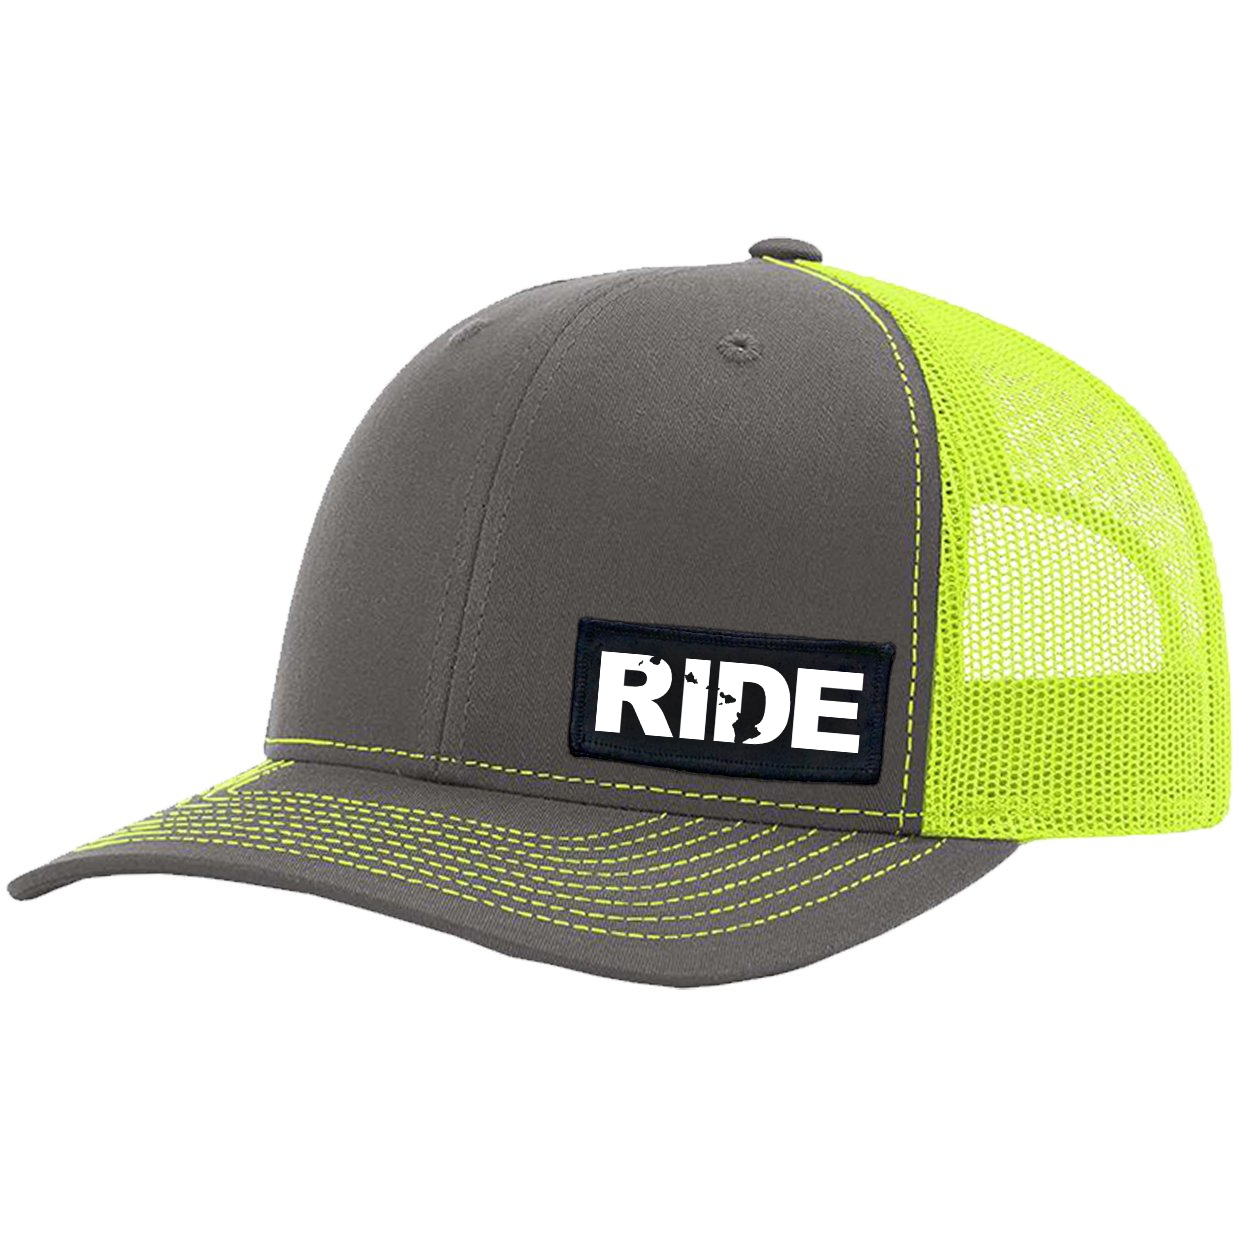 Ride Hawaii Night Out Woven Patch Snapback Trucker Hat Charcoal/Neon Yellow (White Logo)